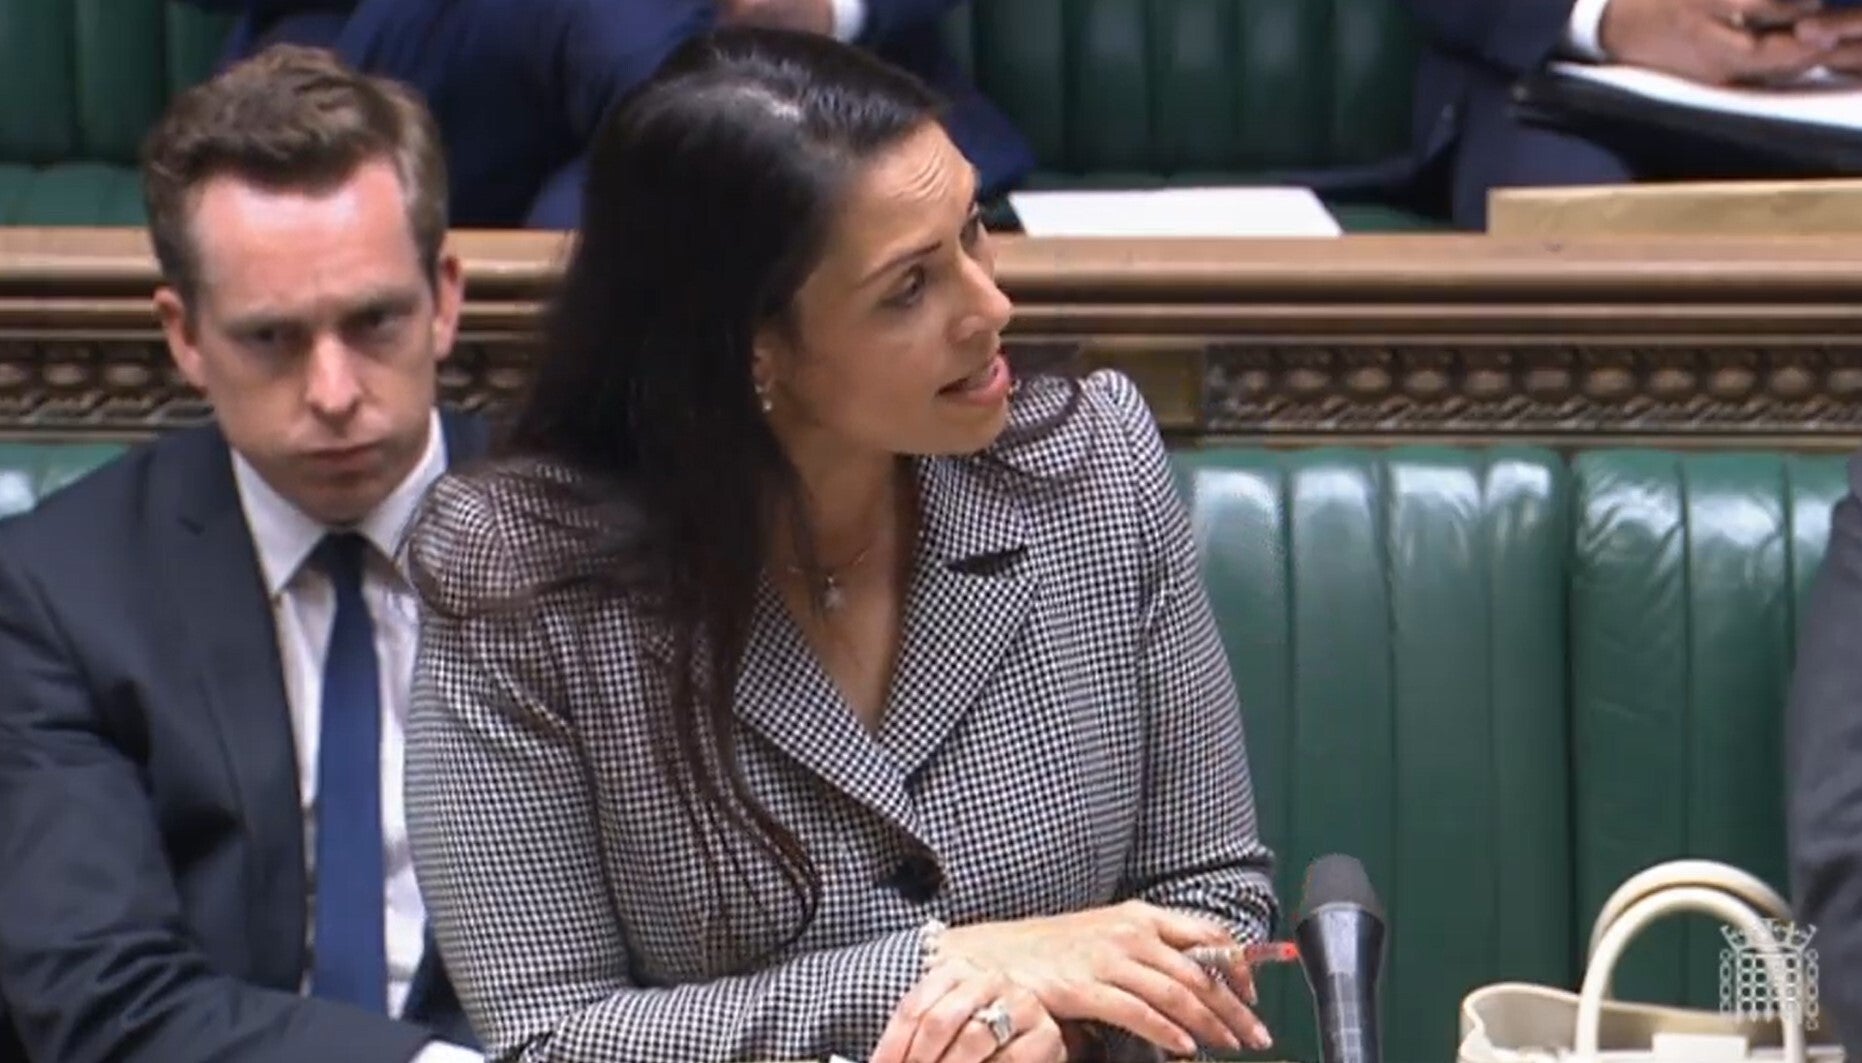 Home Secretary Priti Patel makes a statement to MPs (House of Commons/PA)